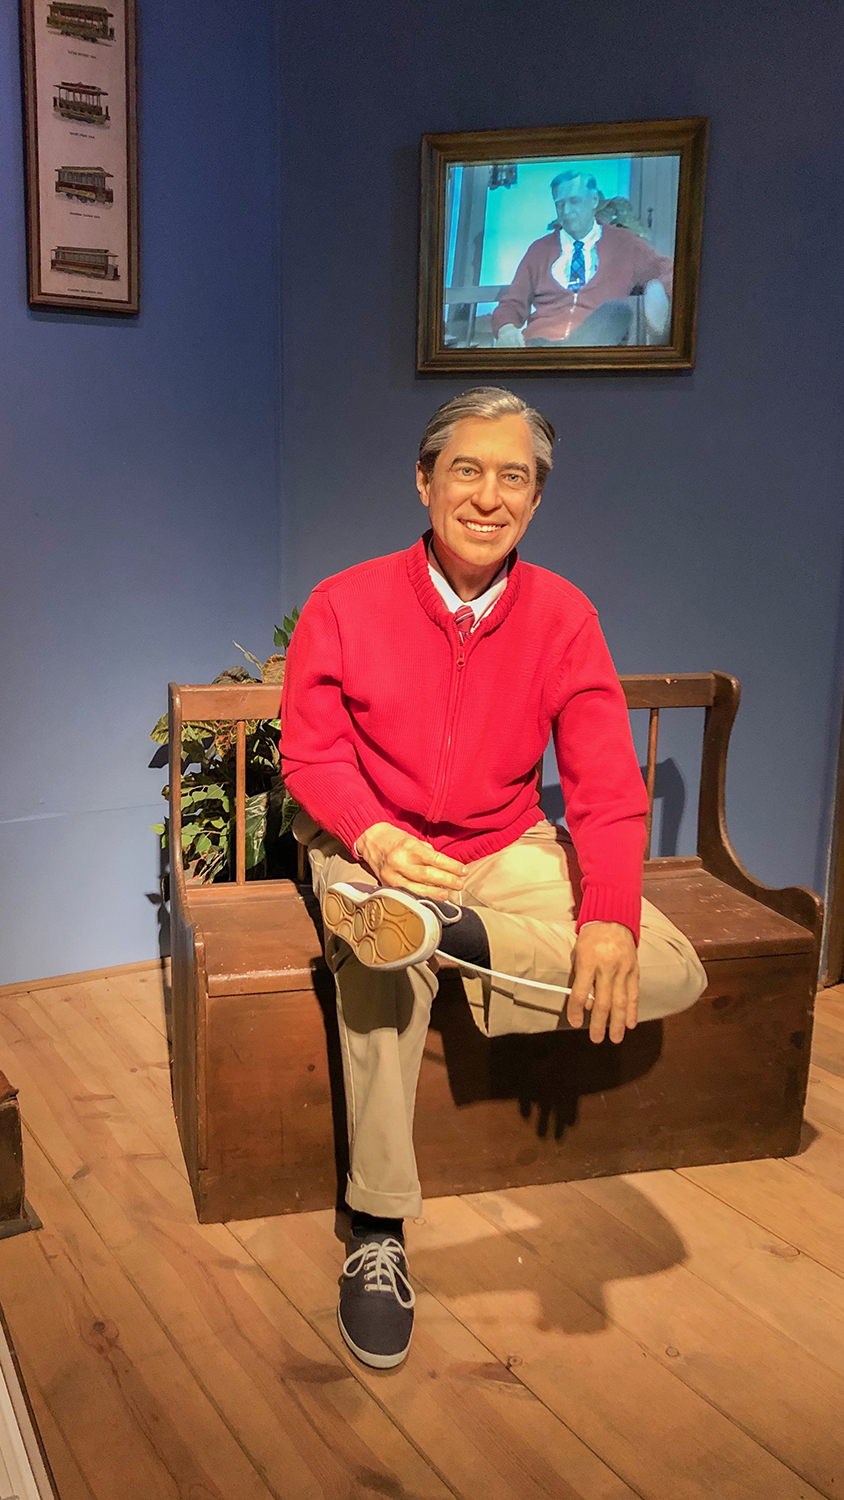 Mister Rogers' bench, on display in the Special Collections gallery.